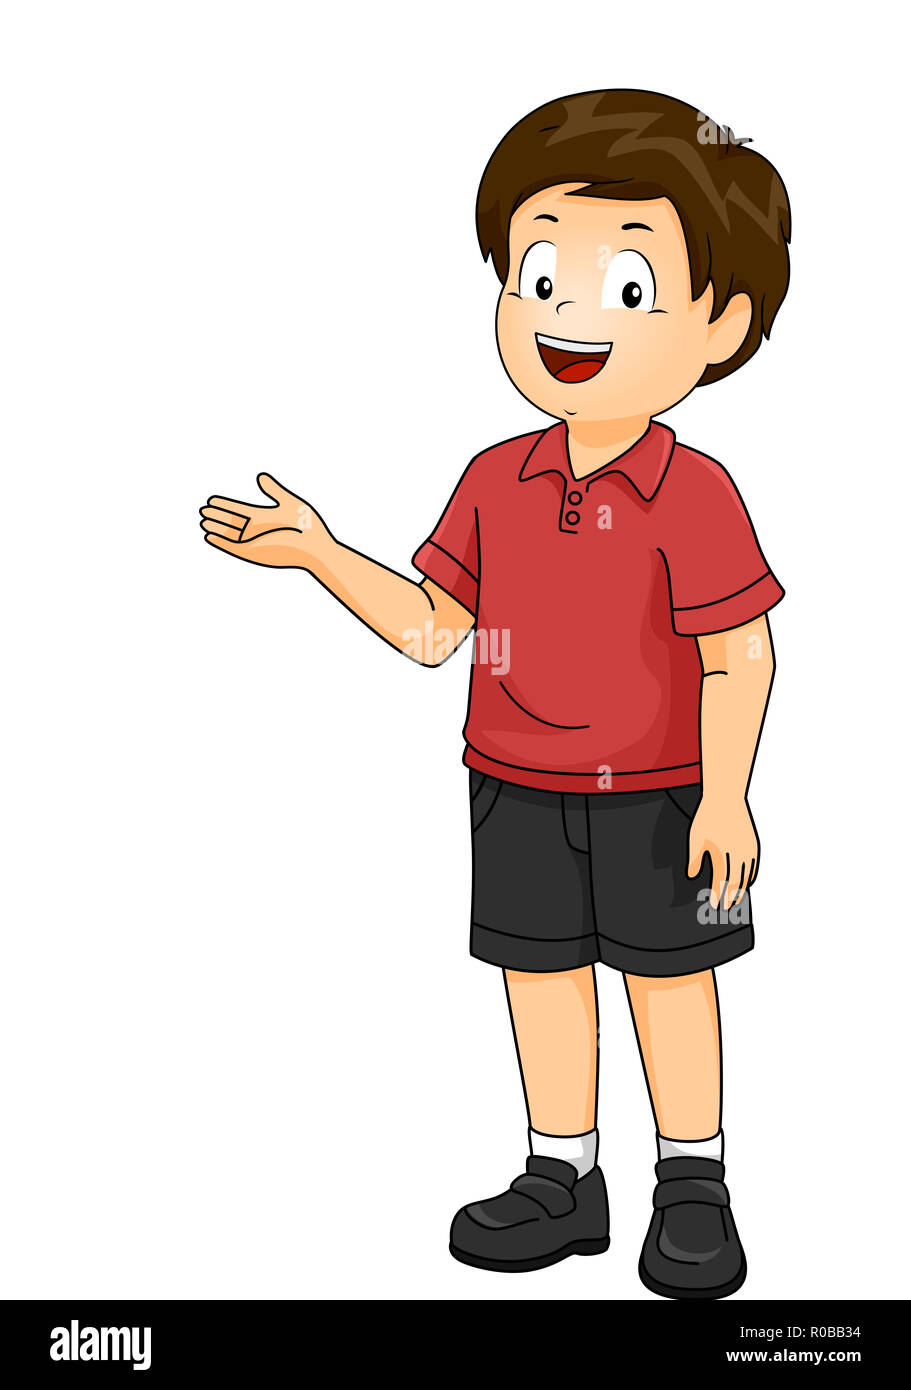 Illustration of a Kid Boy Standing and Presenting Something to His Right  Stock Photo - Alamy